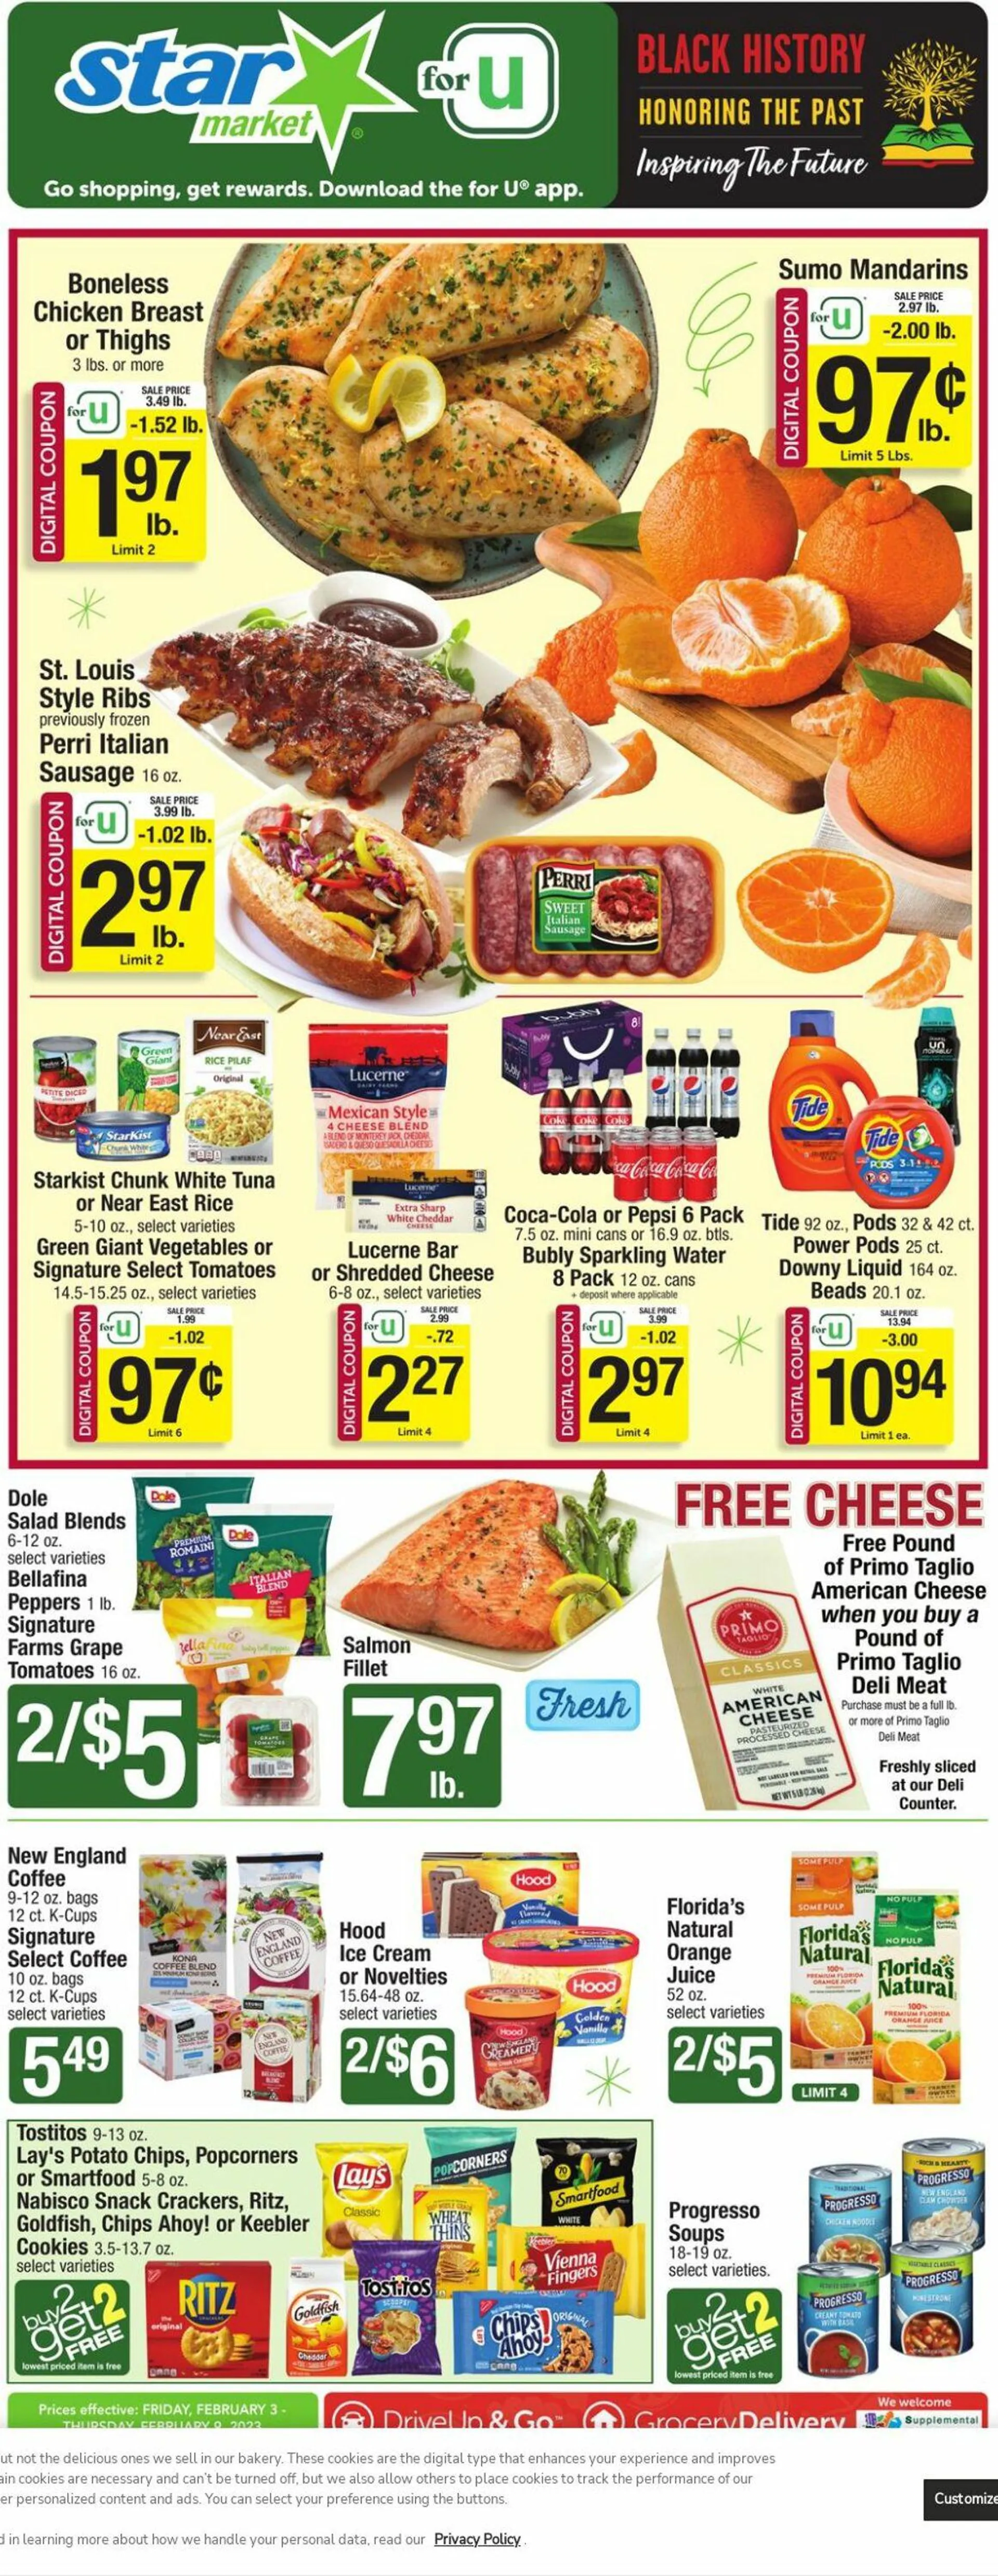 Star Market Current weekly ad - 1